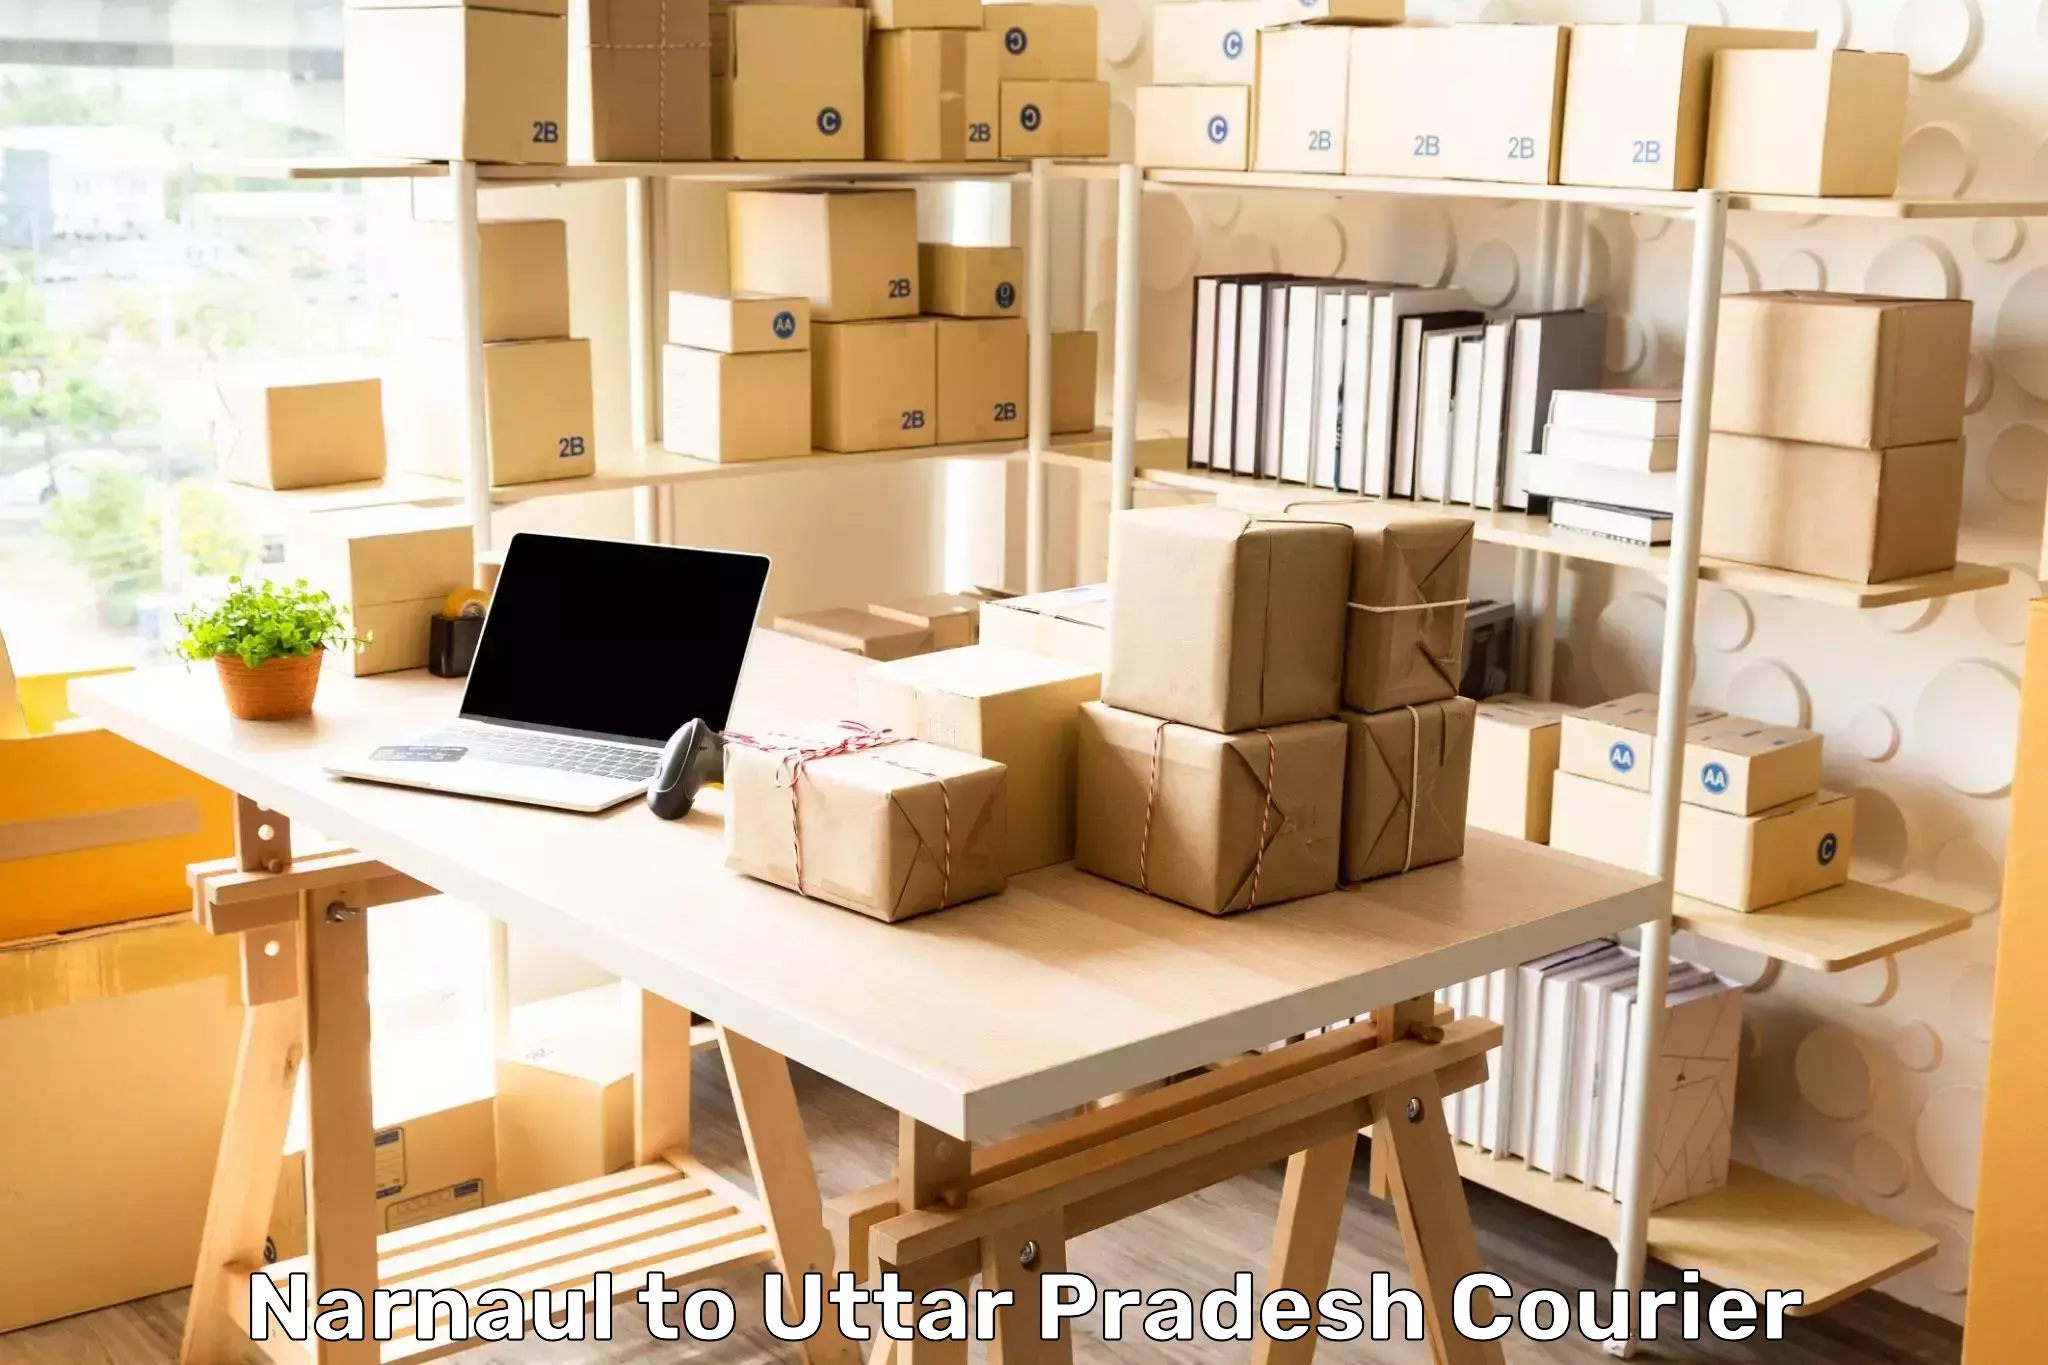 High-capacity parcel service Narnaul to Dhampur